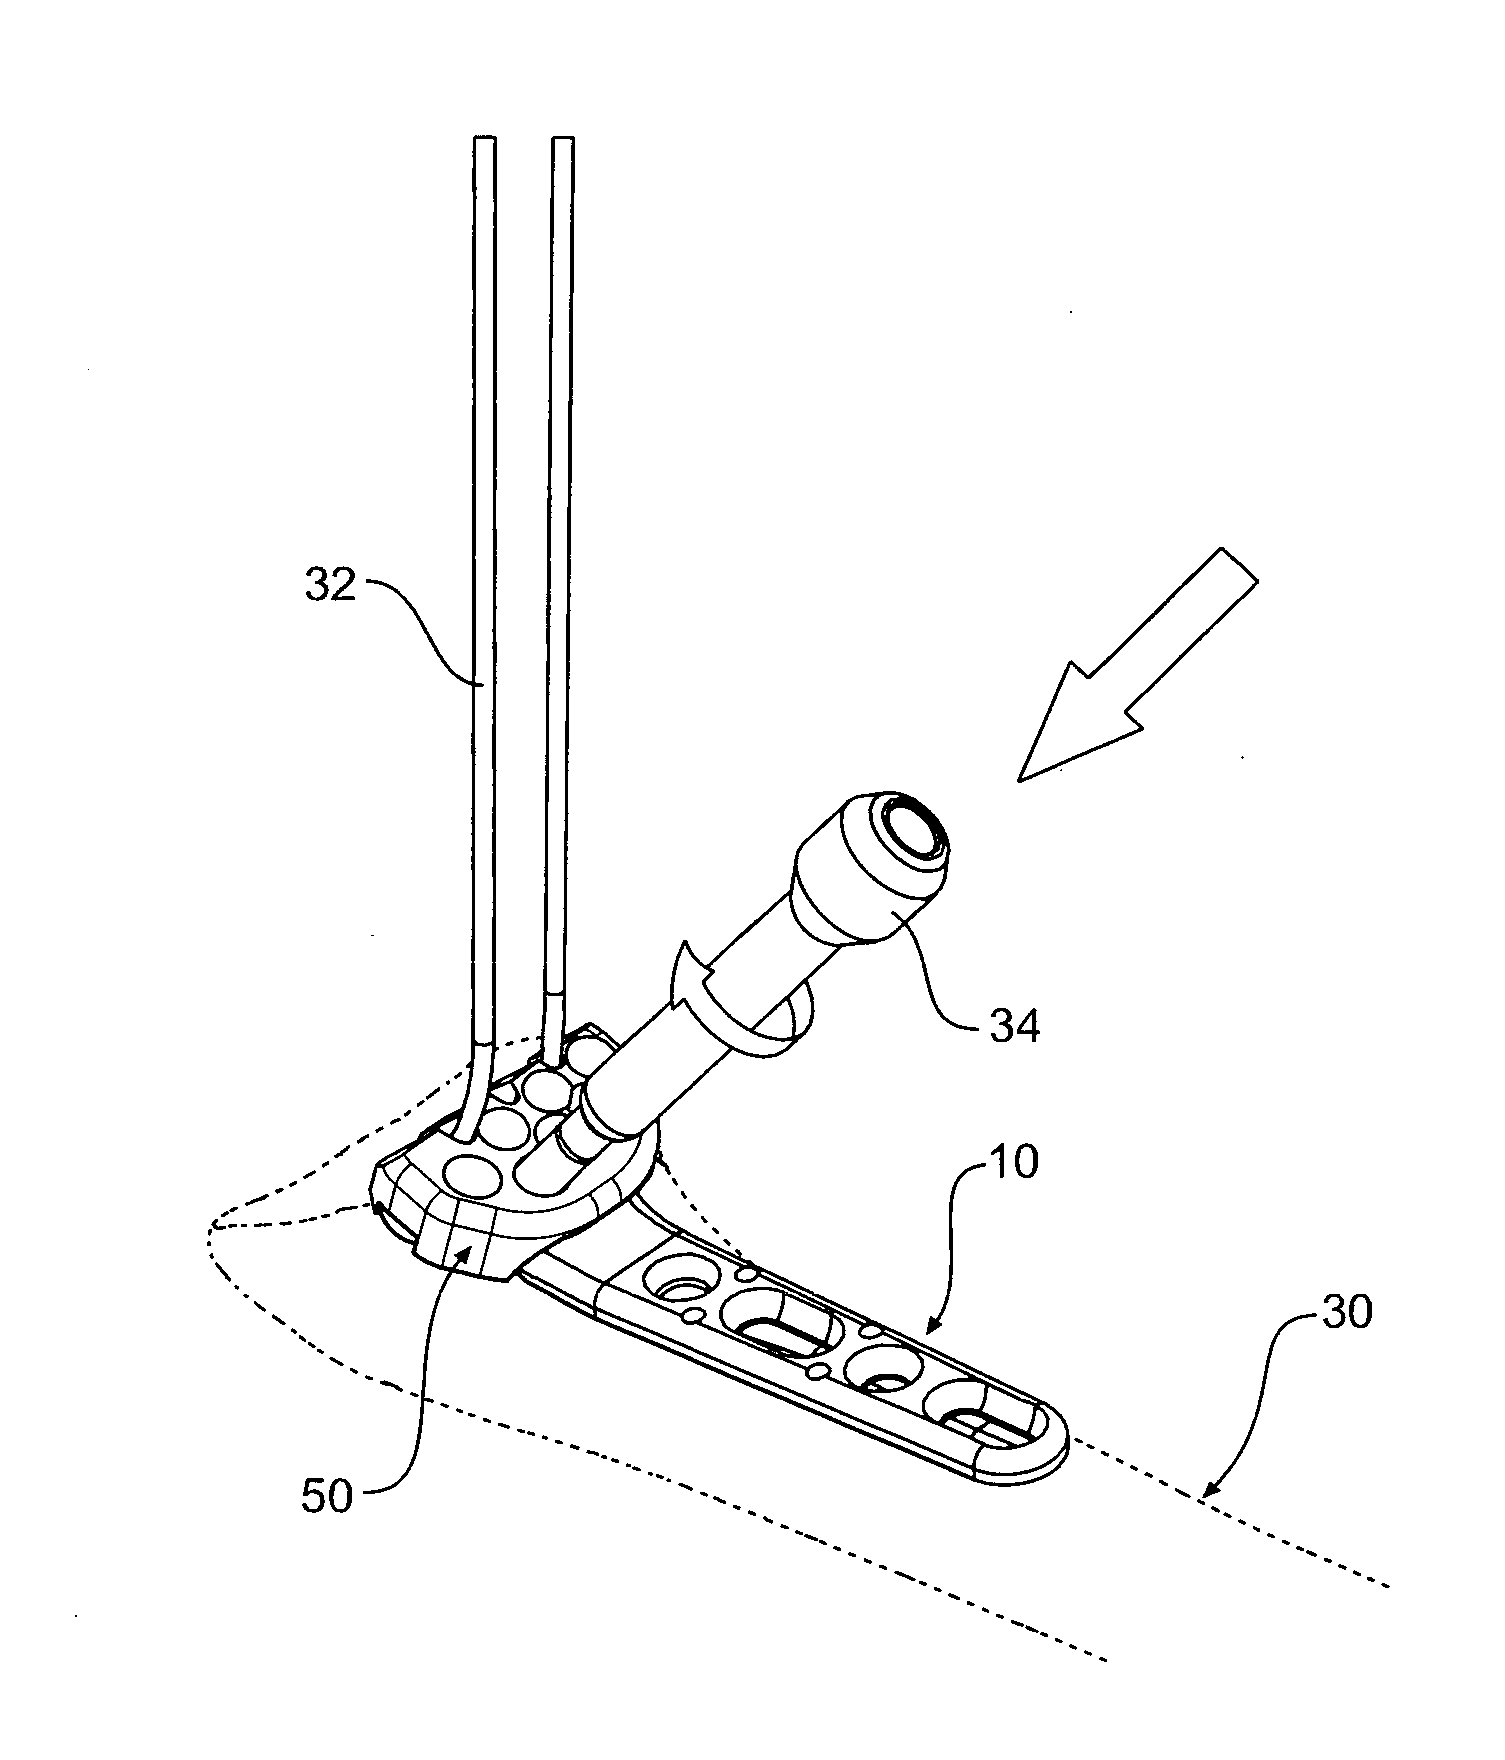 Tool jig for bone implant assembly